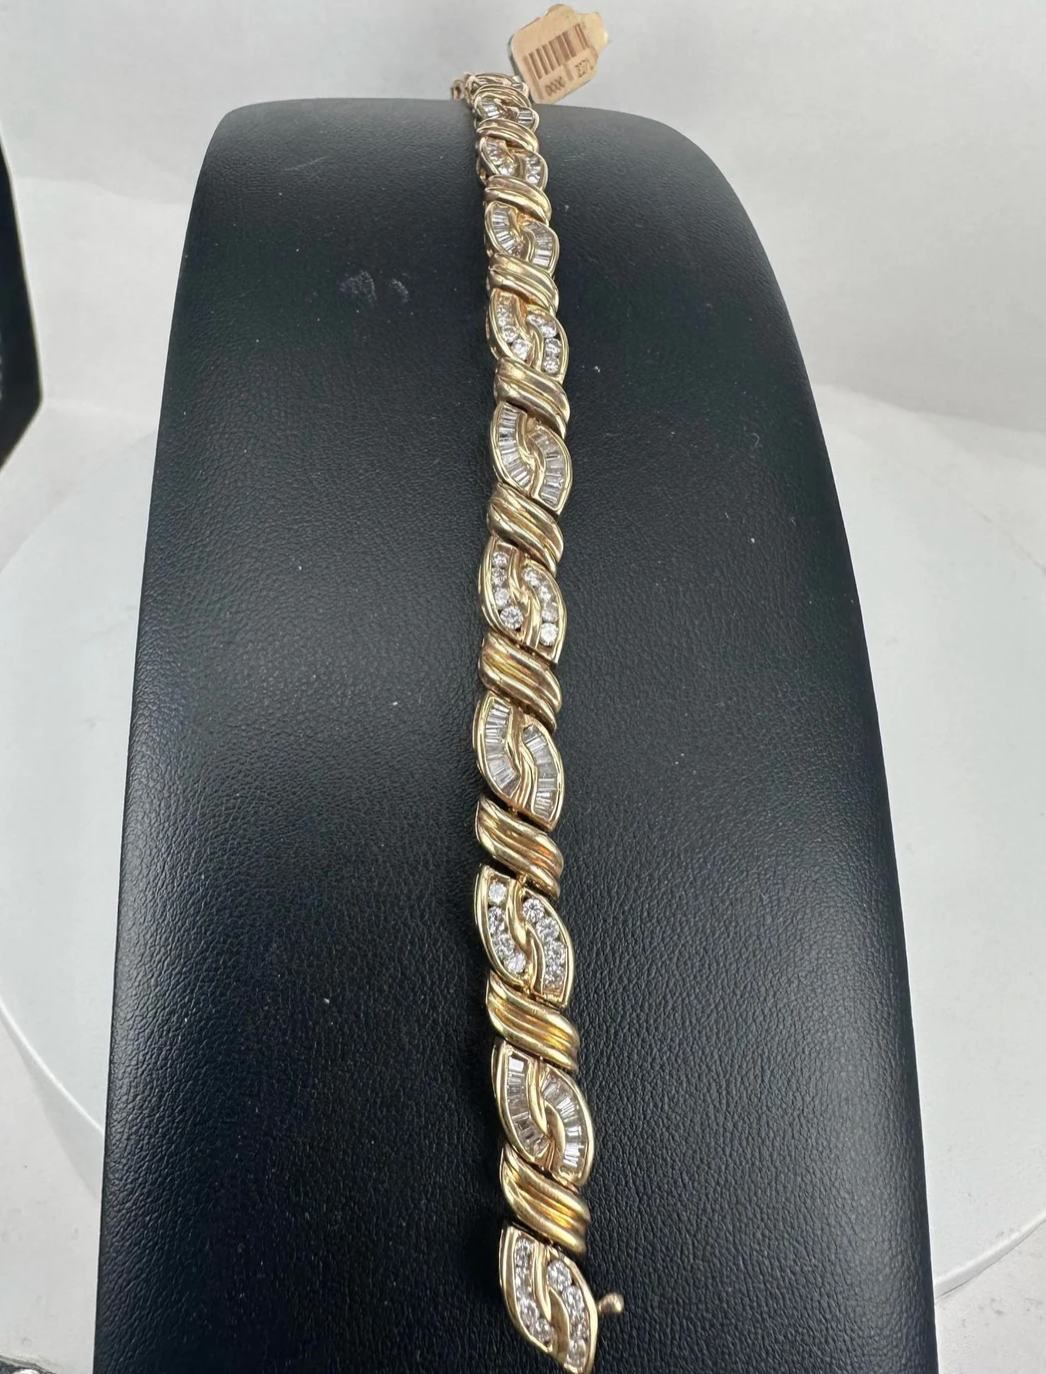 A gold and diamond bracelet is on a black display